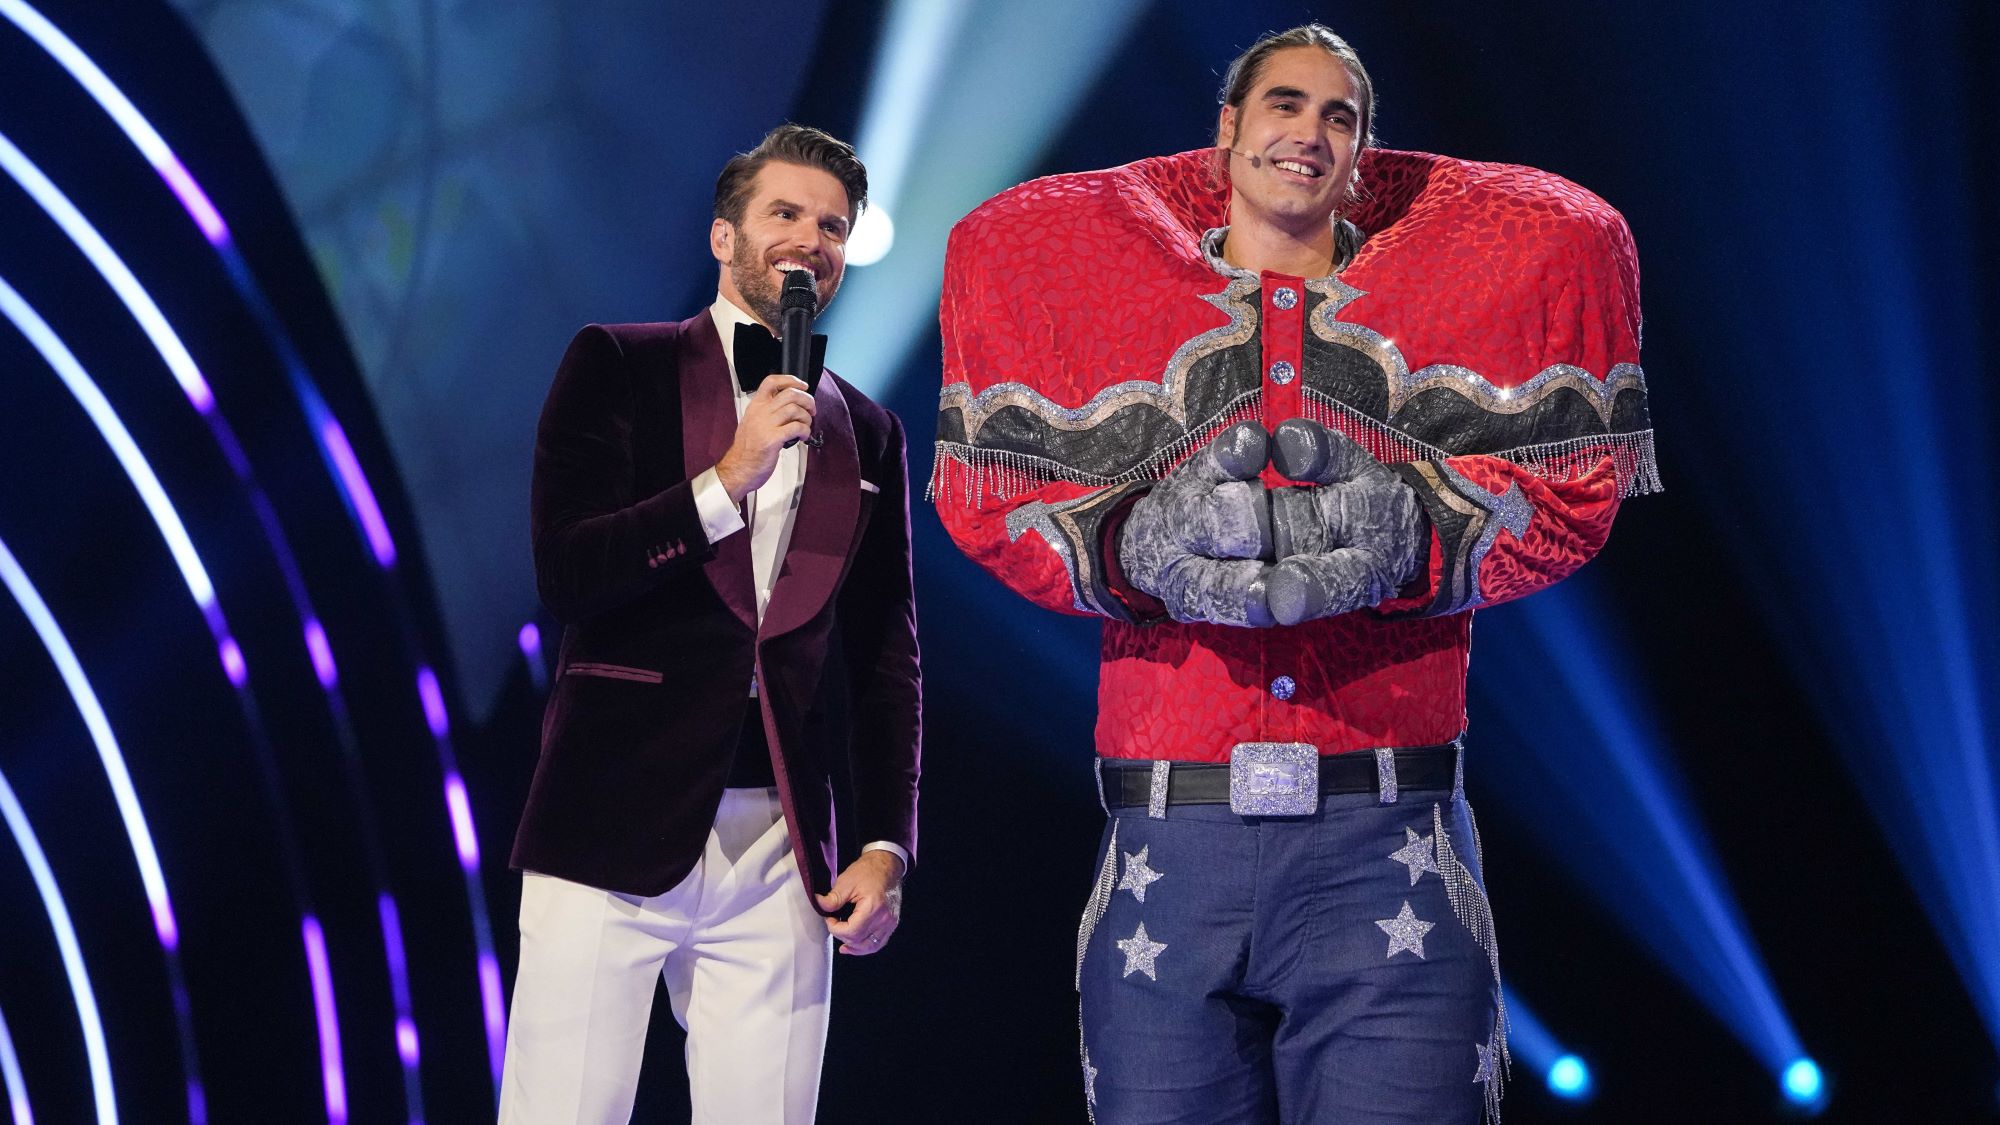 Charlie Simpson reveals all about The Masked Singer as Rhino TellyMix